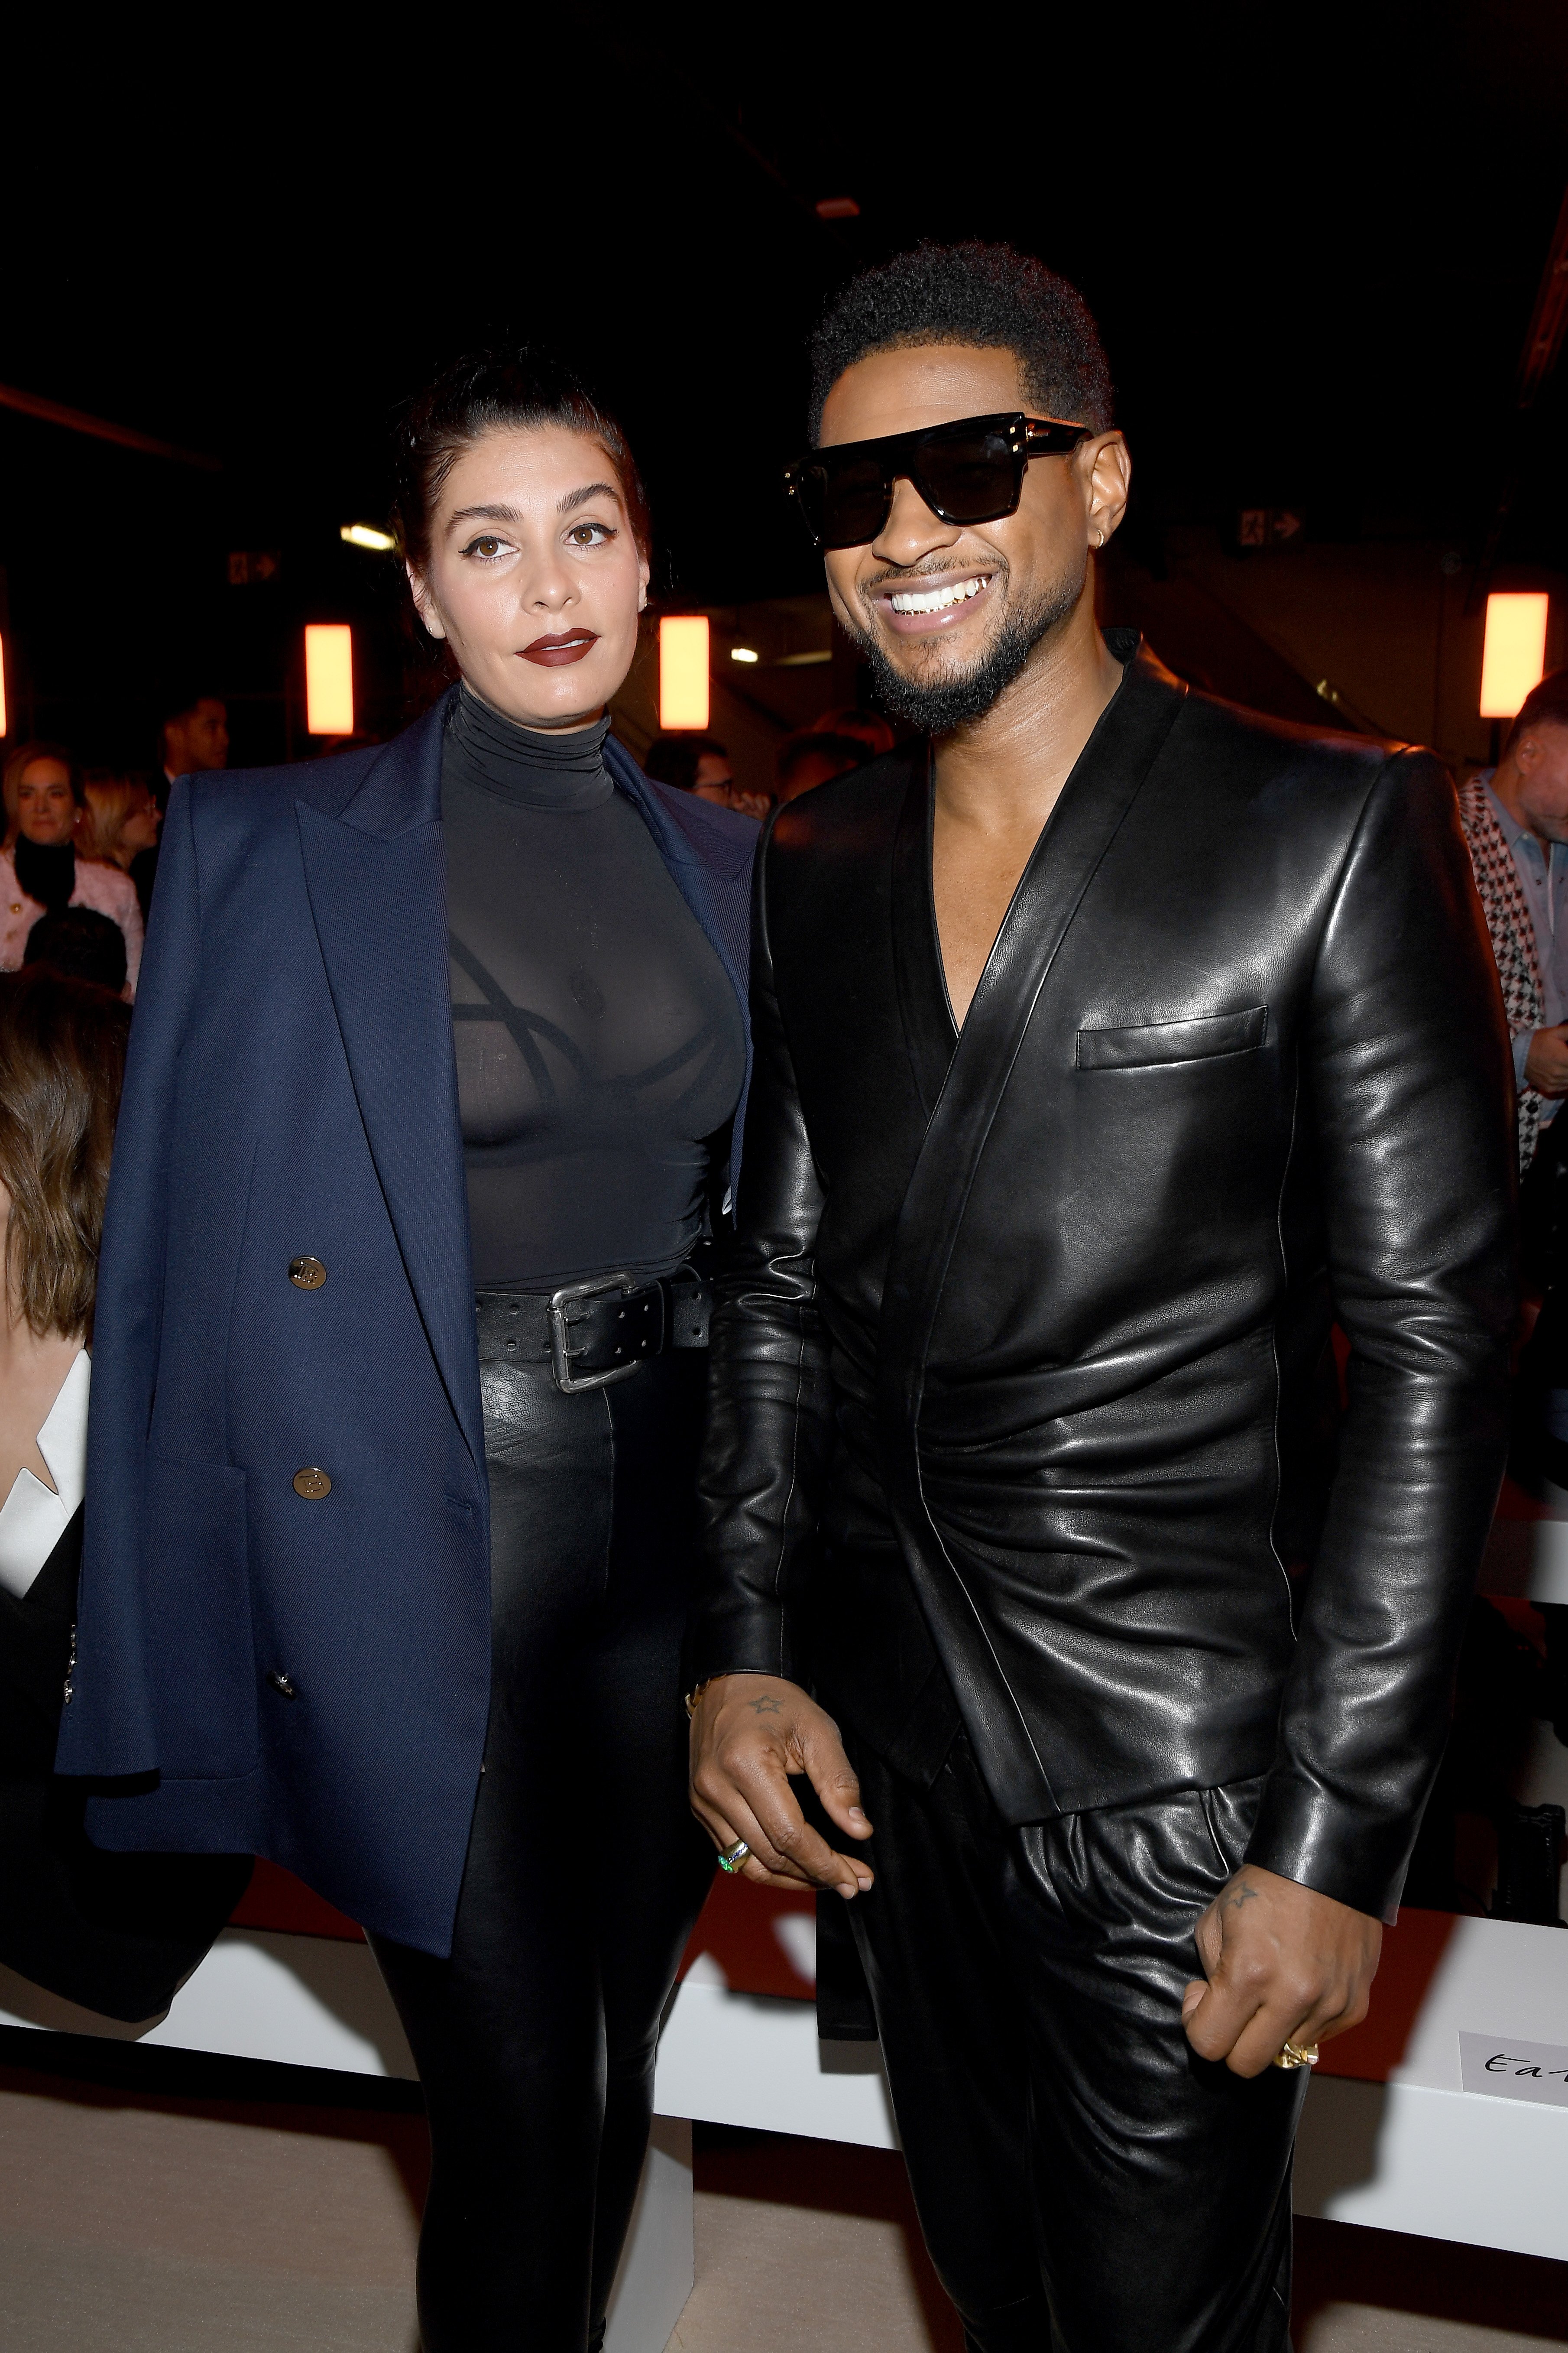 Jenn Goicoechea and Usher attend the Balmain show at Paris Fashion Week on February 28, 2020 in Paris, France. | Source: Getty Images